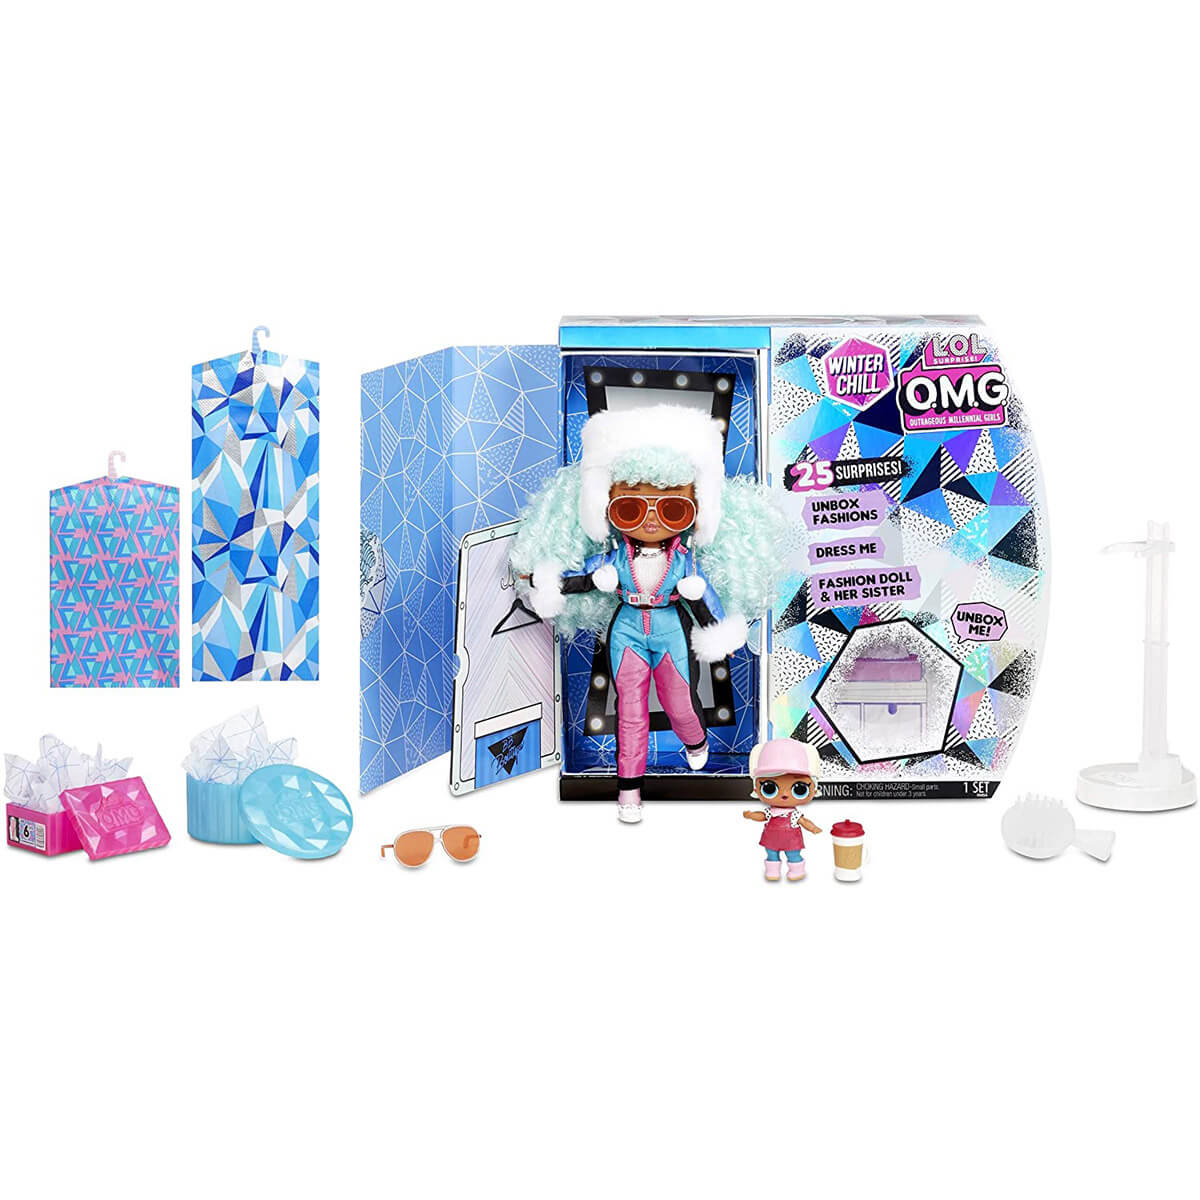 L.O.L. Surprise! O.M.G. Winter Chill Icy Gurl Fashion Doll with 25 Surprises